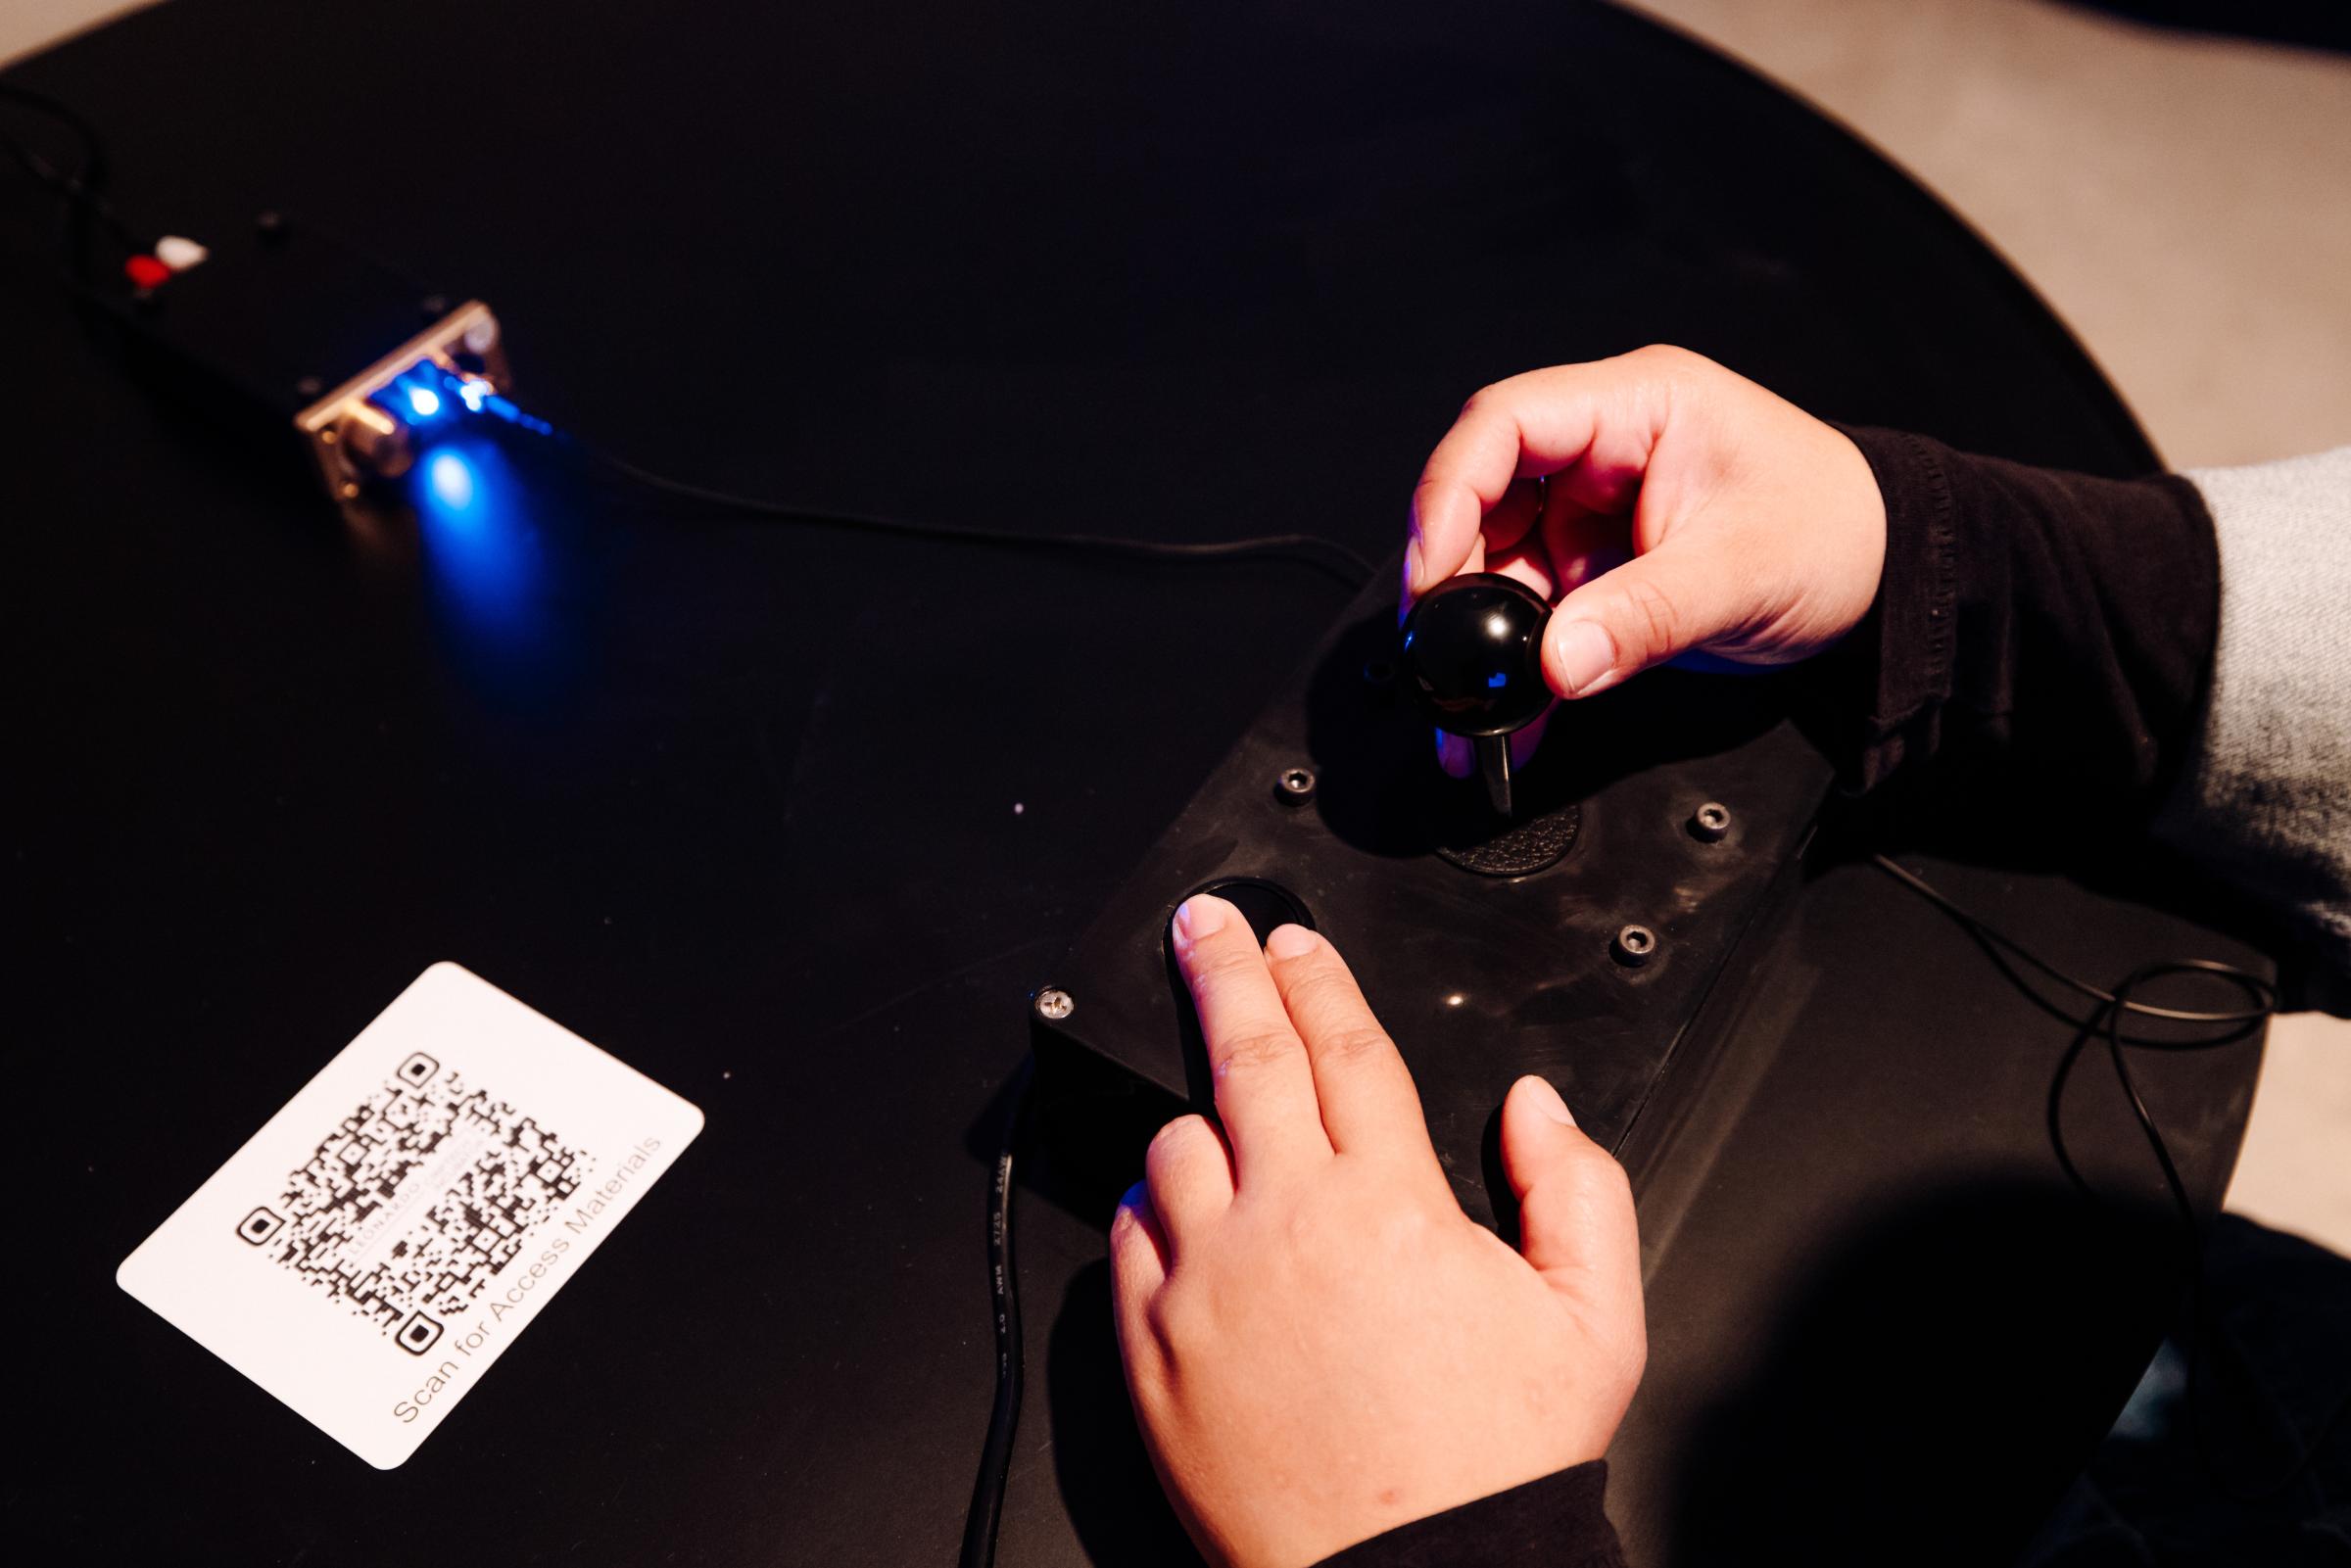 Visitor with pale hands is interacting with a joystick and buttons on a controller. There is a headphone amp with lights on directly in front of the controller. To the left of the controller is a QR code. 

